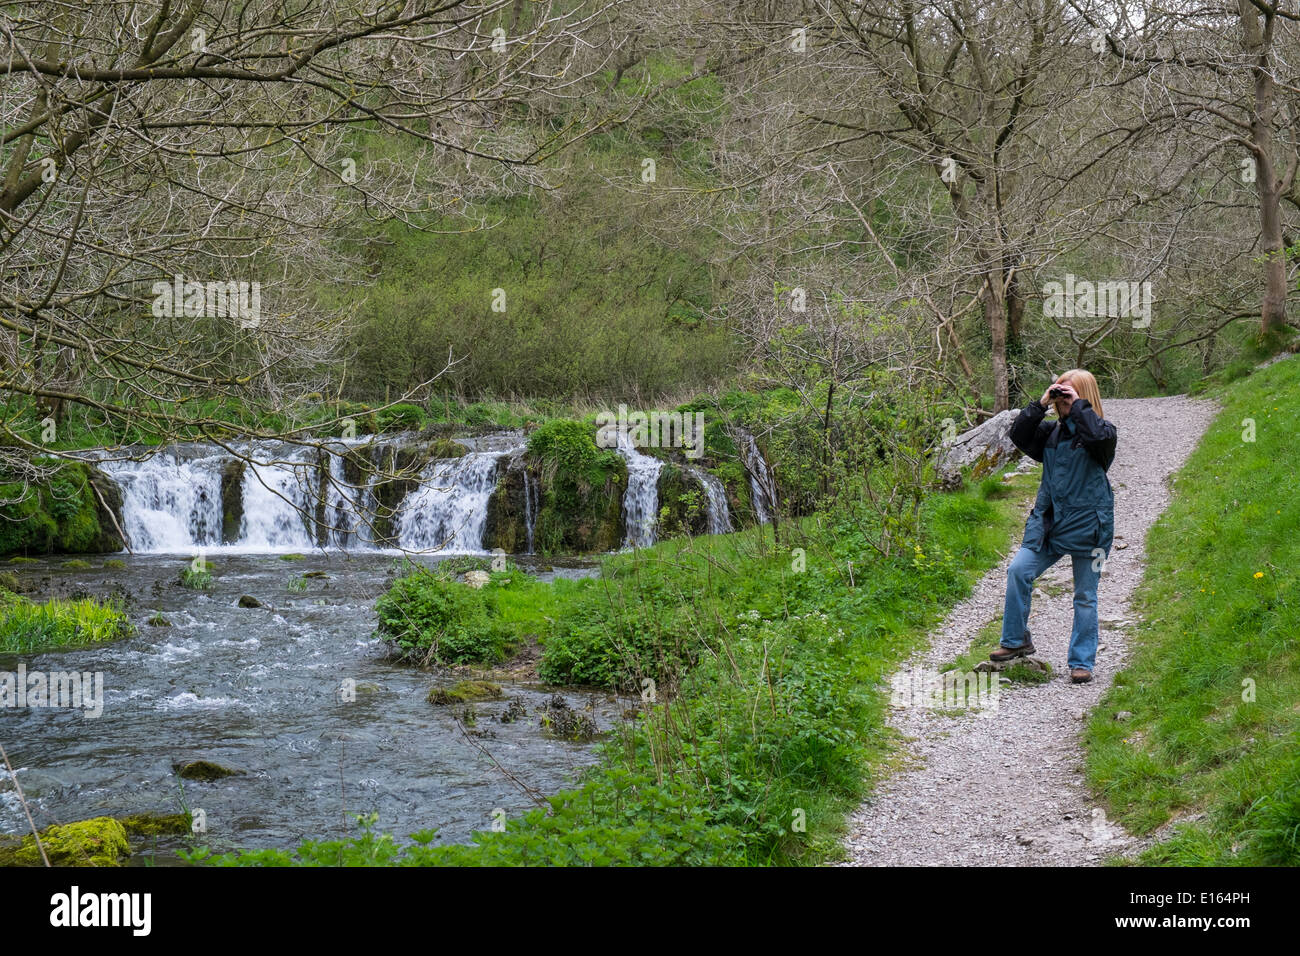 View of the River Lathkill, Lathkill dale, Peak District National Park, Derbyshire, England, May Stock Photo